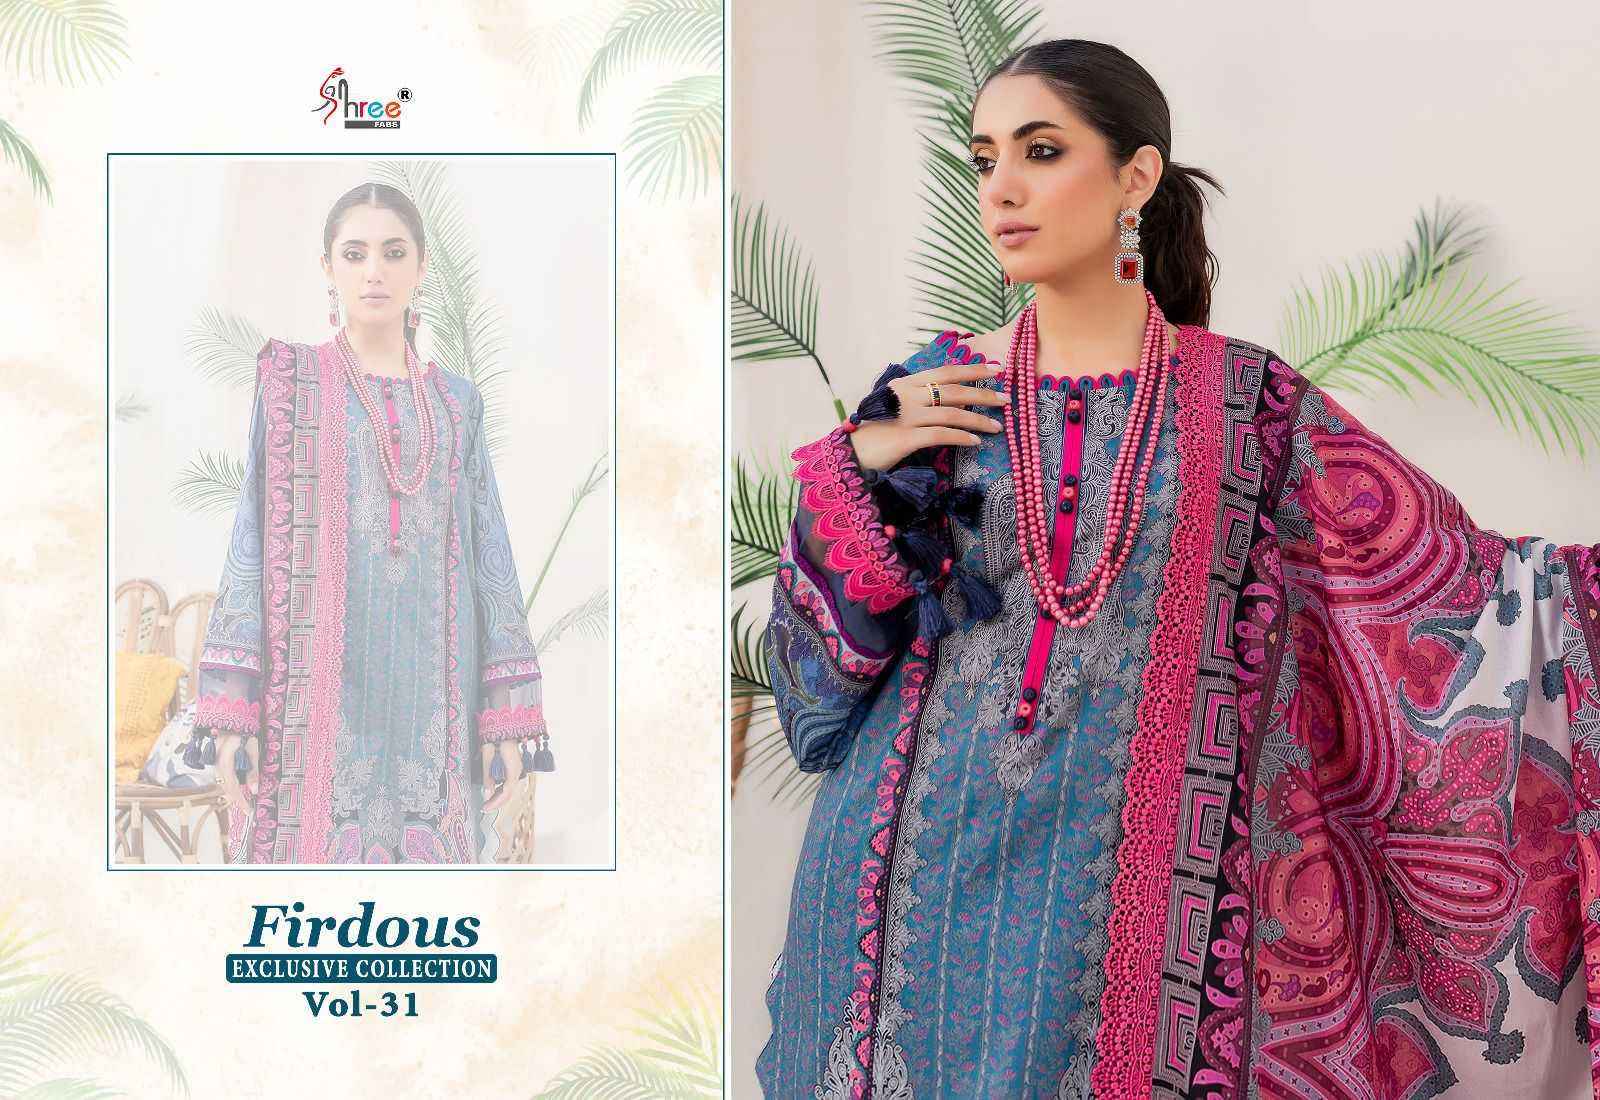 SHREE FAB FIRDOUS EXCLUSIVE COLLECTION 31 PAKISTANI SUITS WHOLESALE PRICE